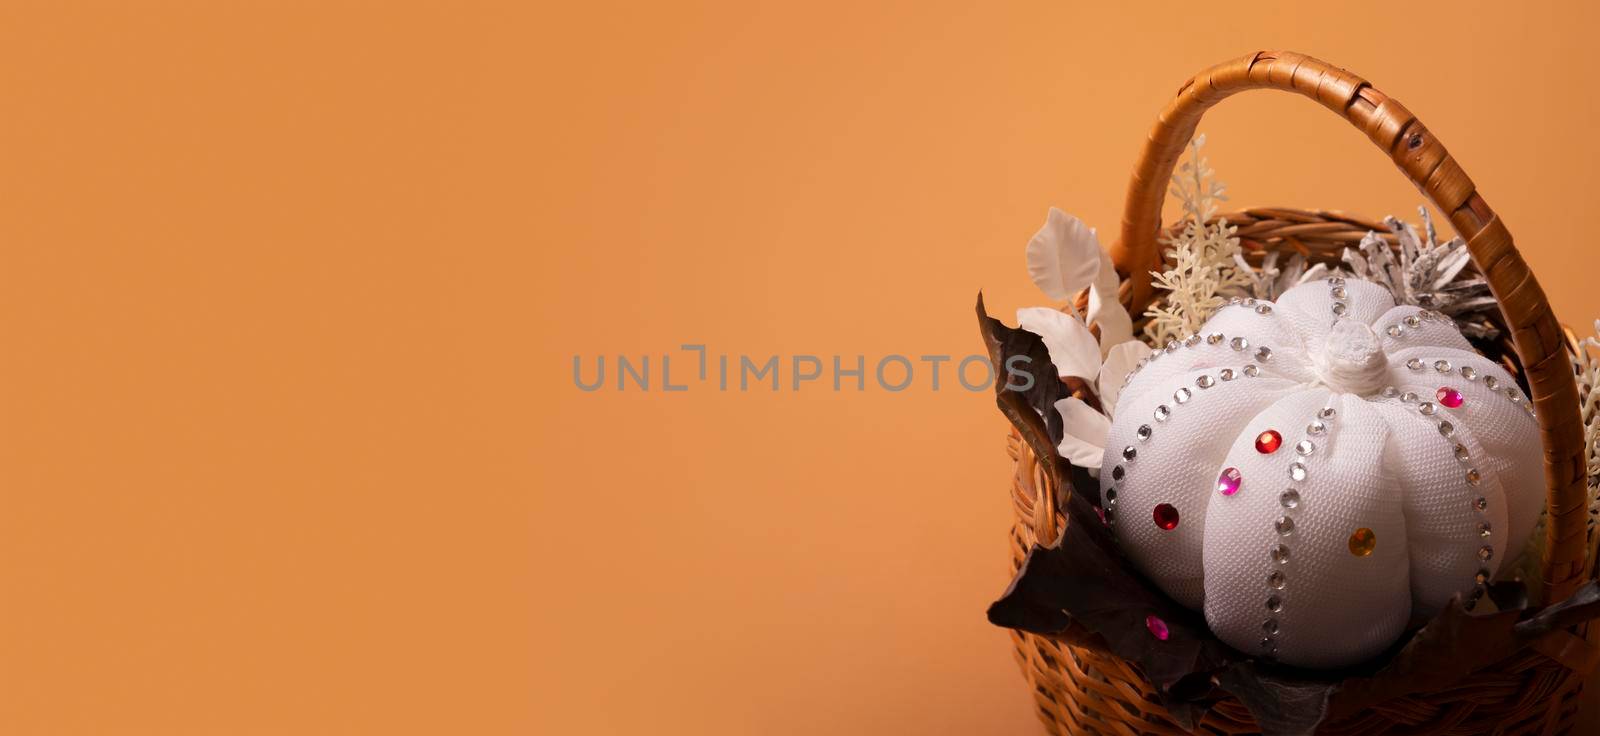 Banner with white decorative hand made pumpkin with shiny stones and fall leaves in basket on orange background by ssvimaliss